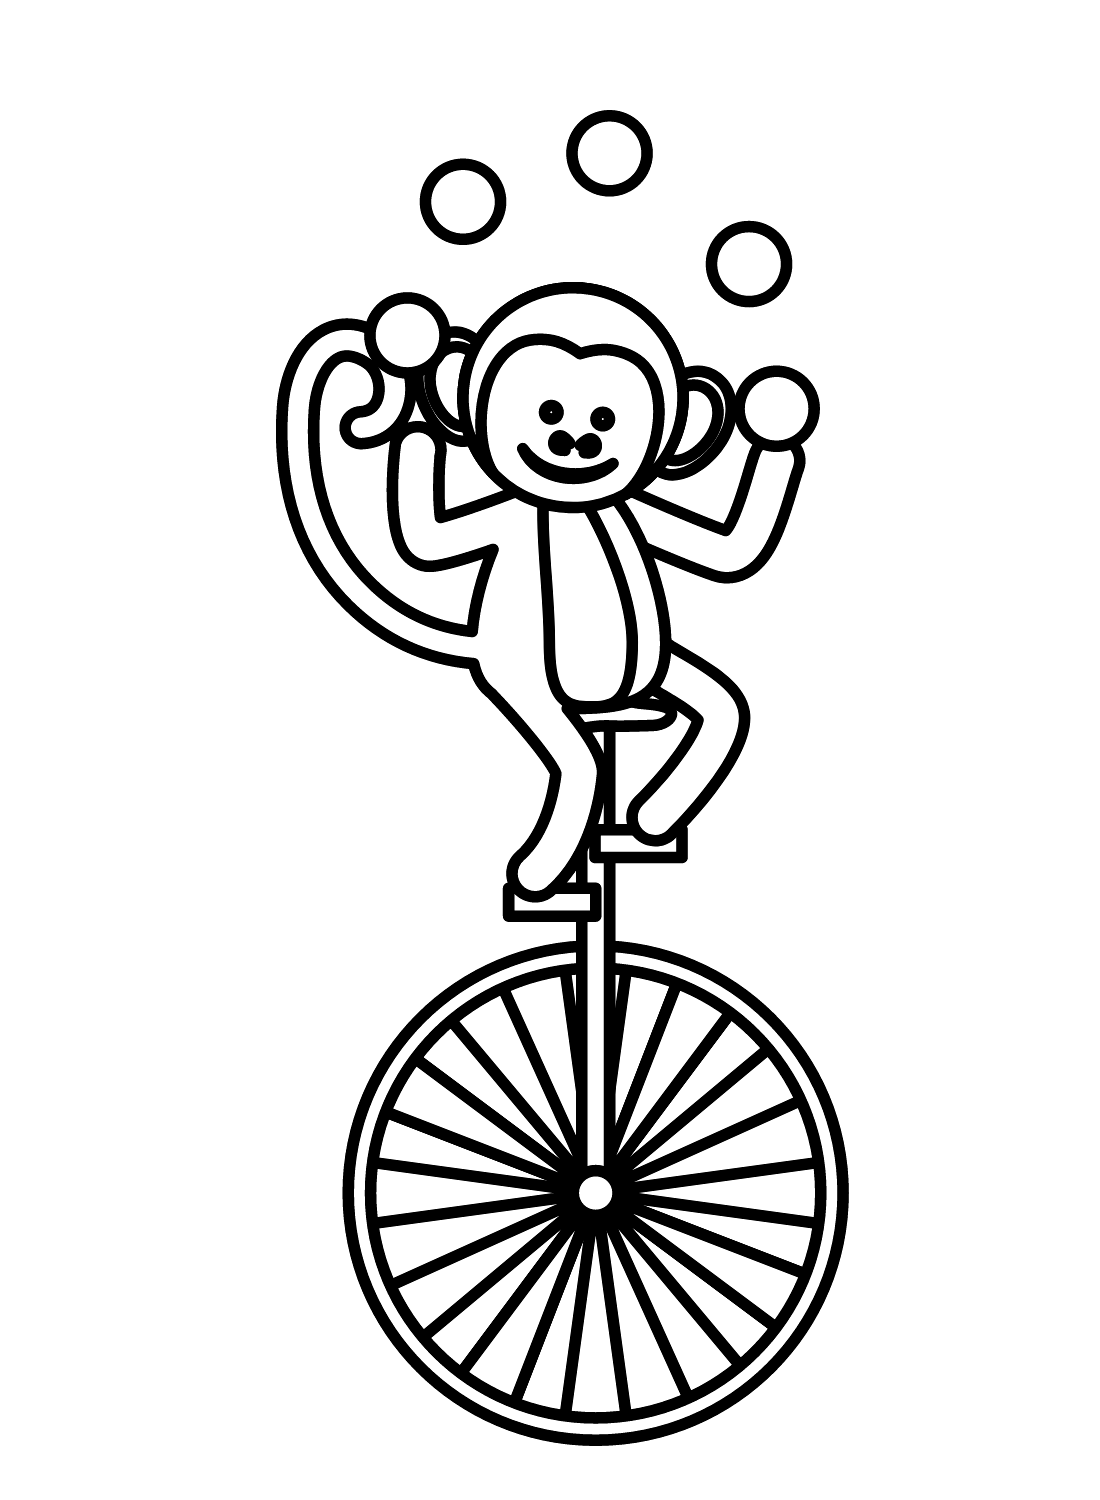 Unicycle 的马戏团猴子独轮车